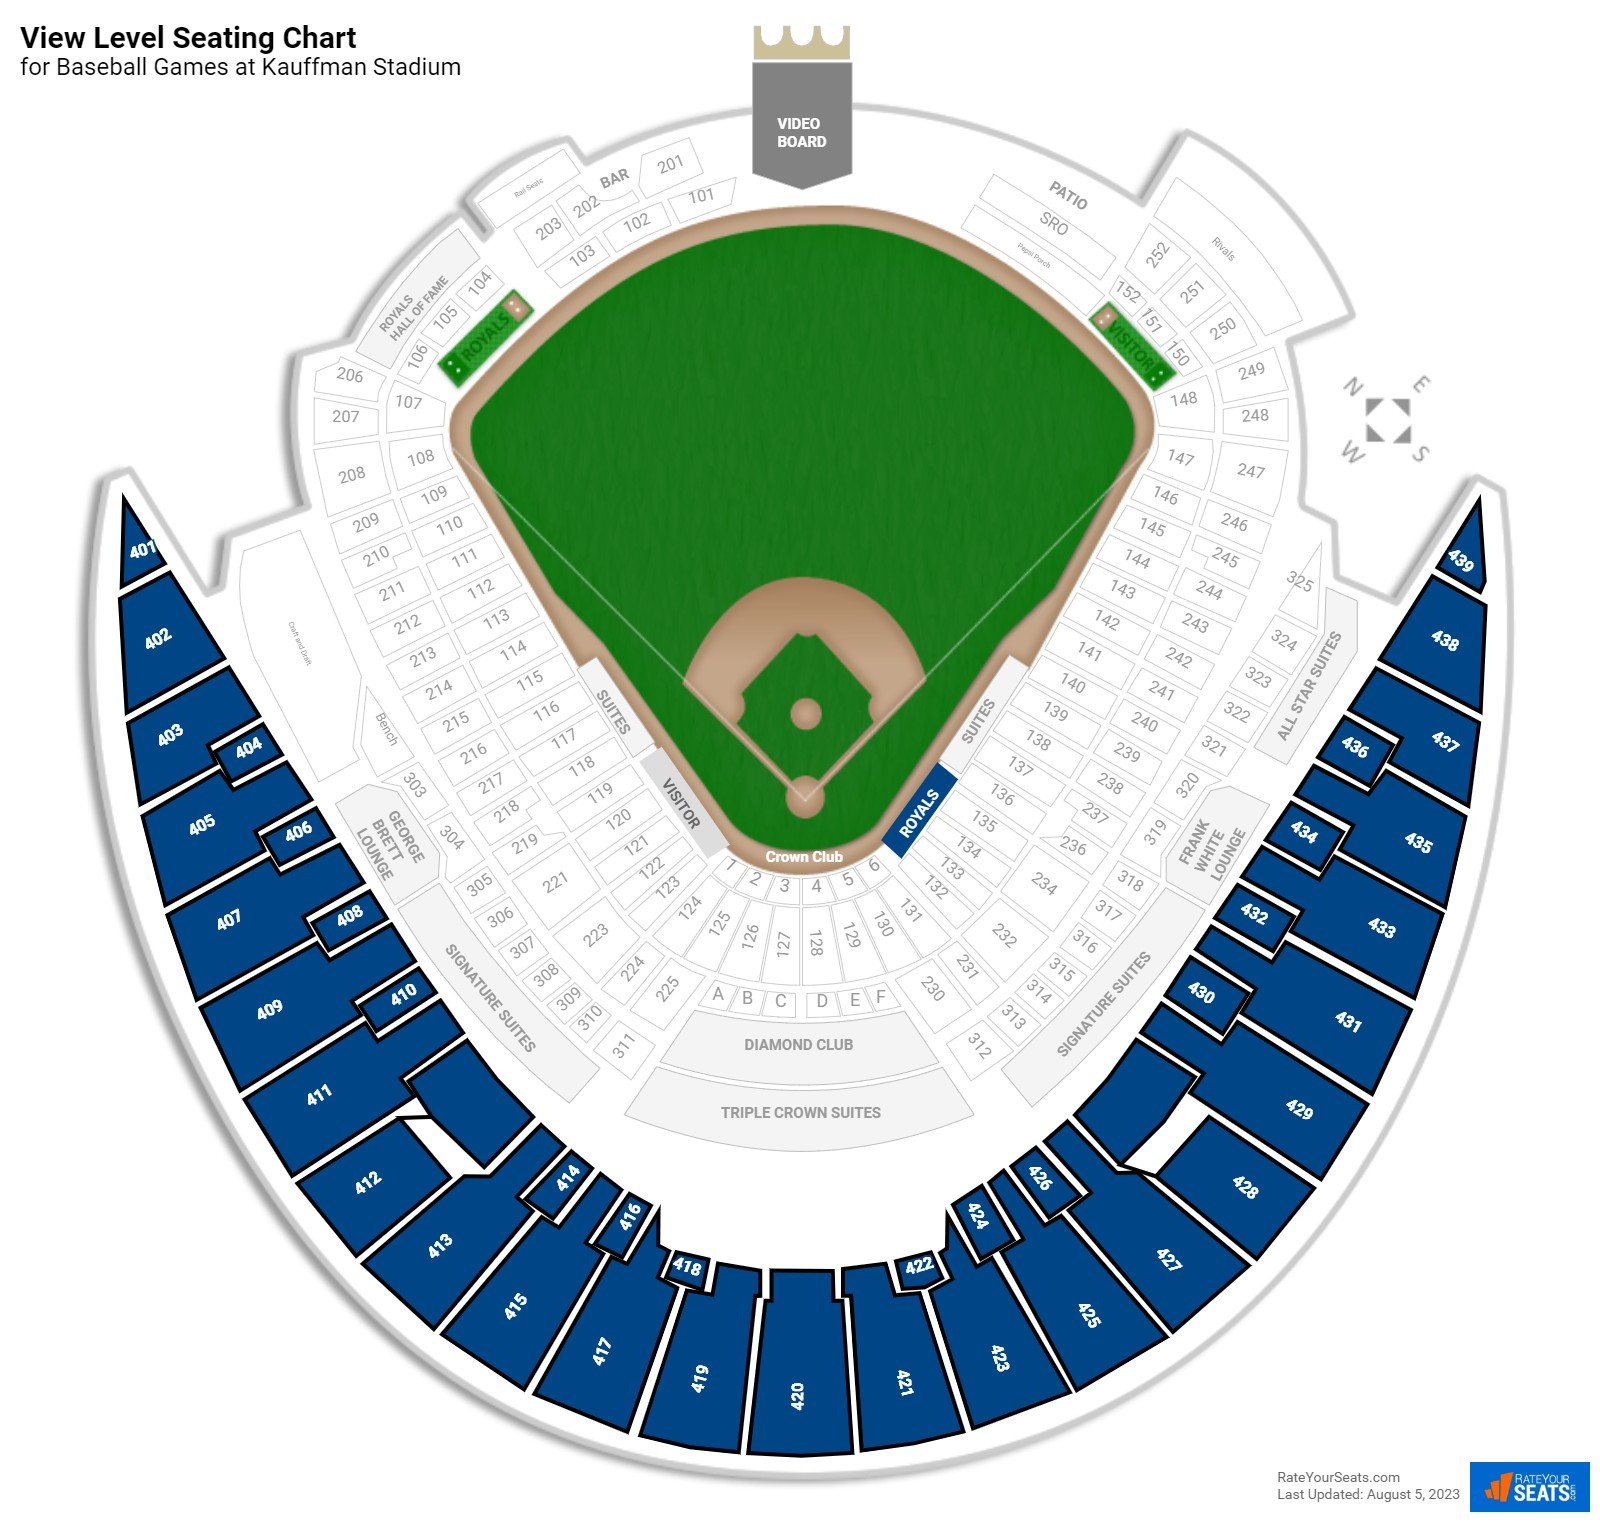 Kauffman Stadium Seating Chart With Rows And Seat Numbers Awesome Home